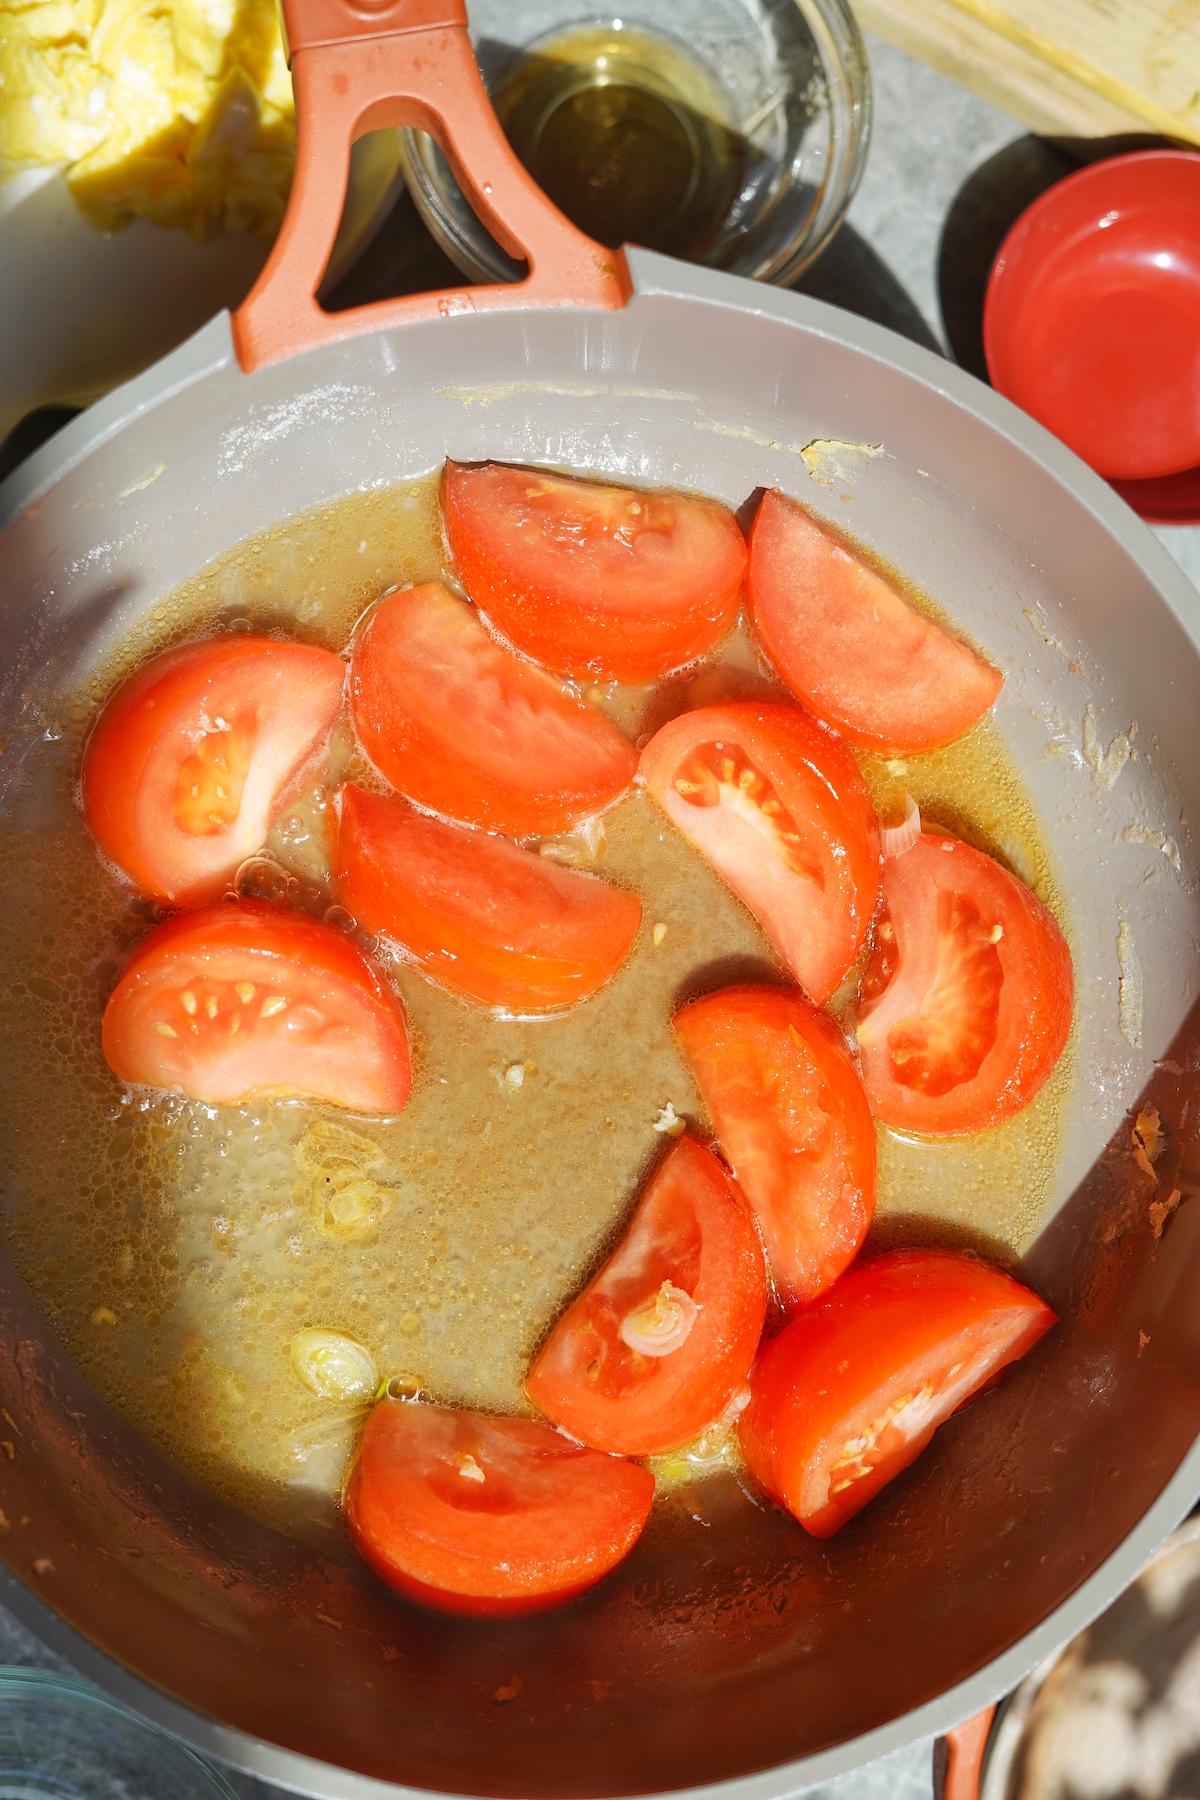 Tomatoes cooking in the seasoning.